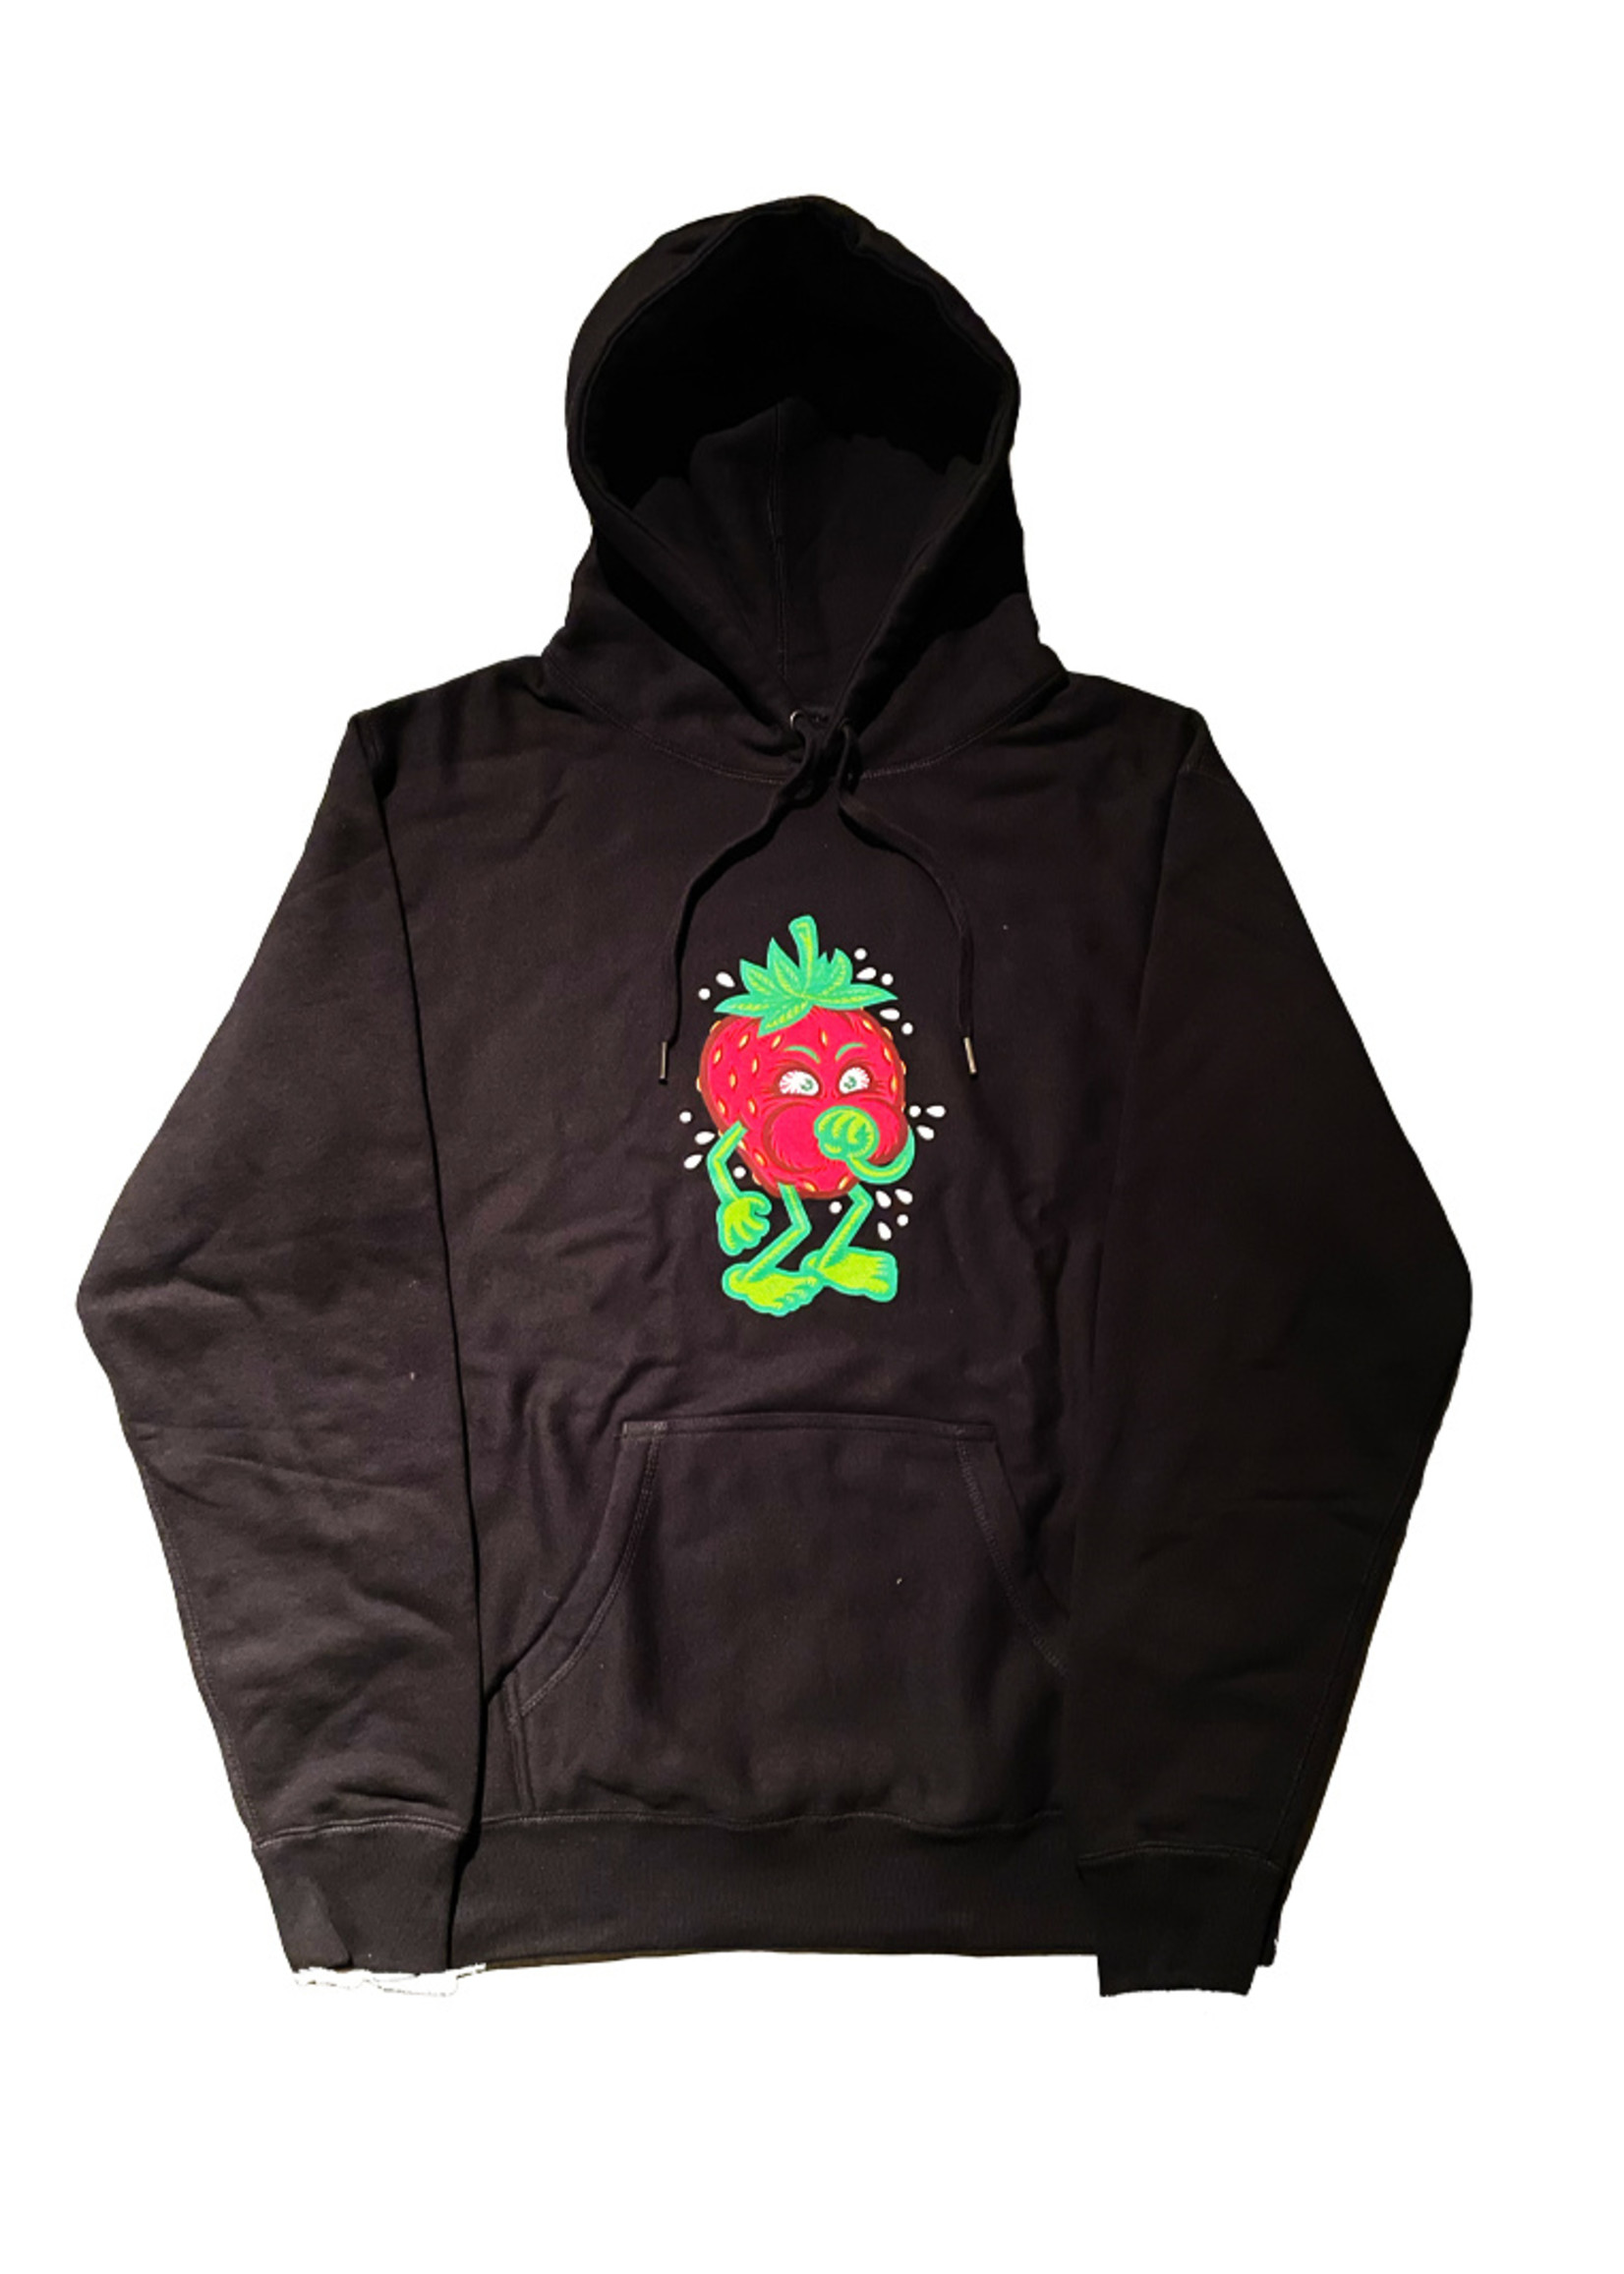 FAMILIA SKATESHOP STRAWBERRY COUGH HEAVYWEIGHT HOODIE - BLACK ( ONLINE ONLY )